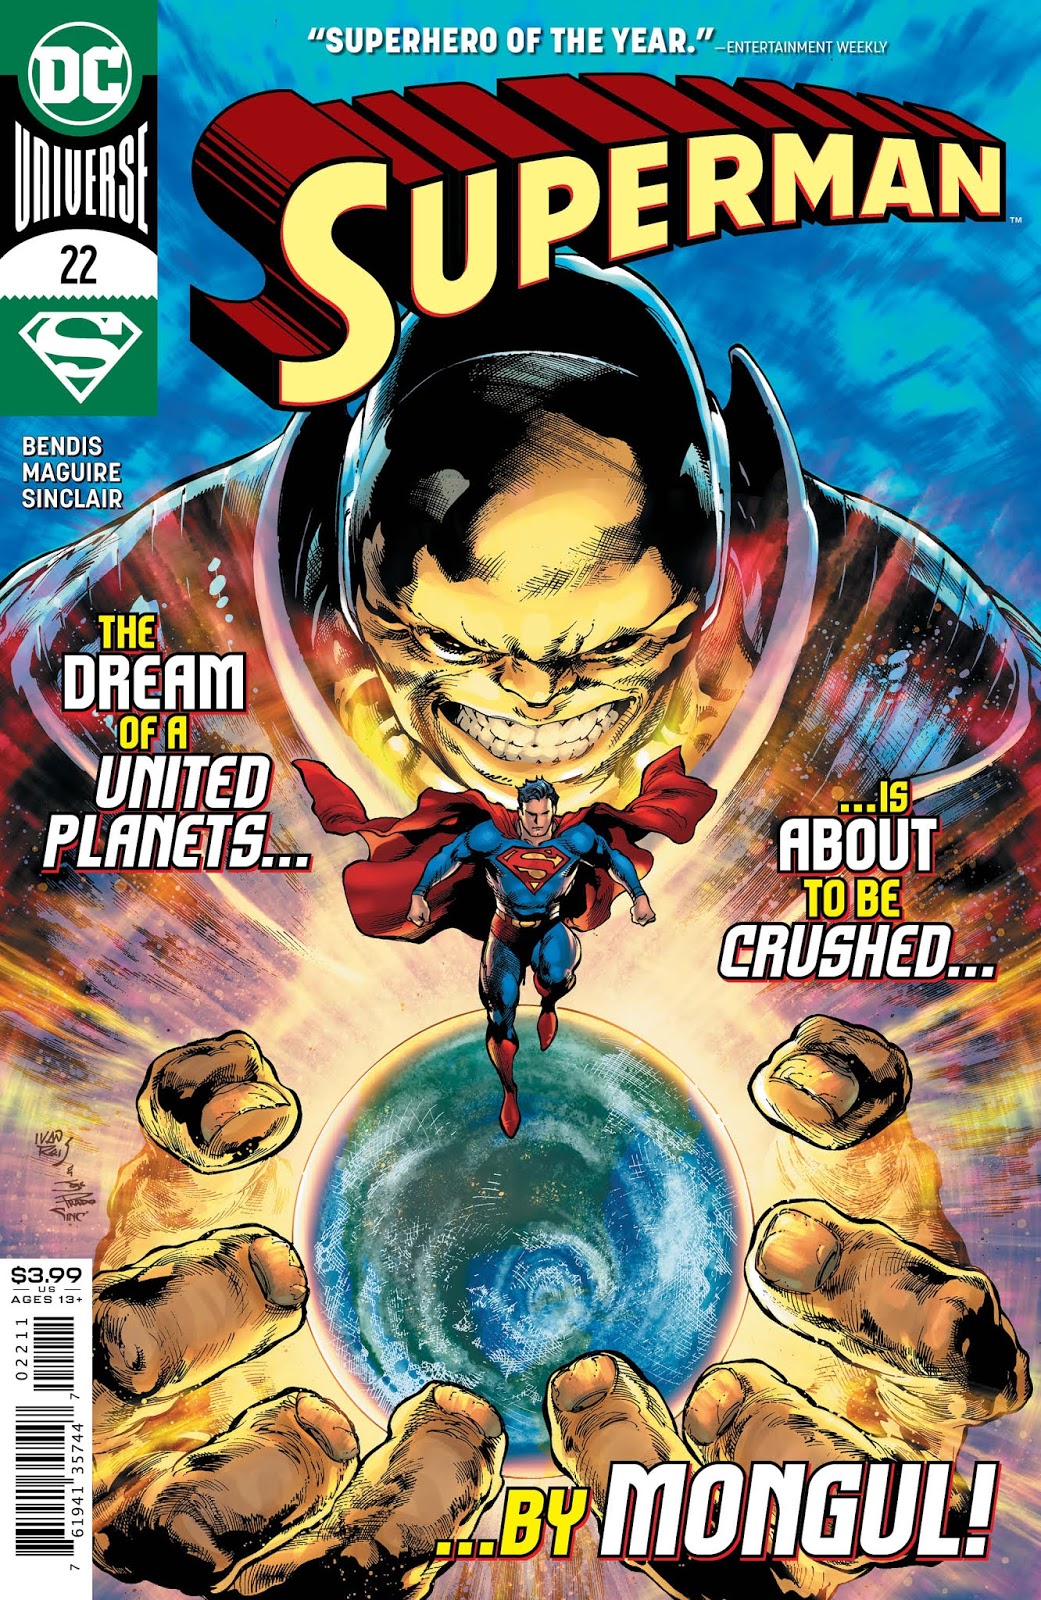 Superman #22 Review